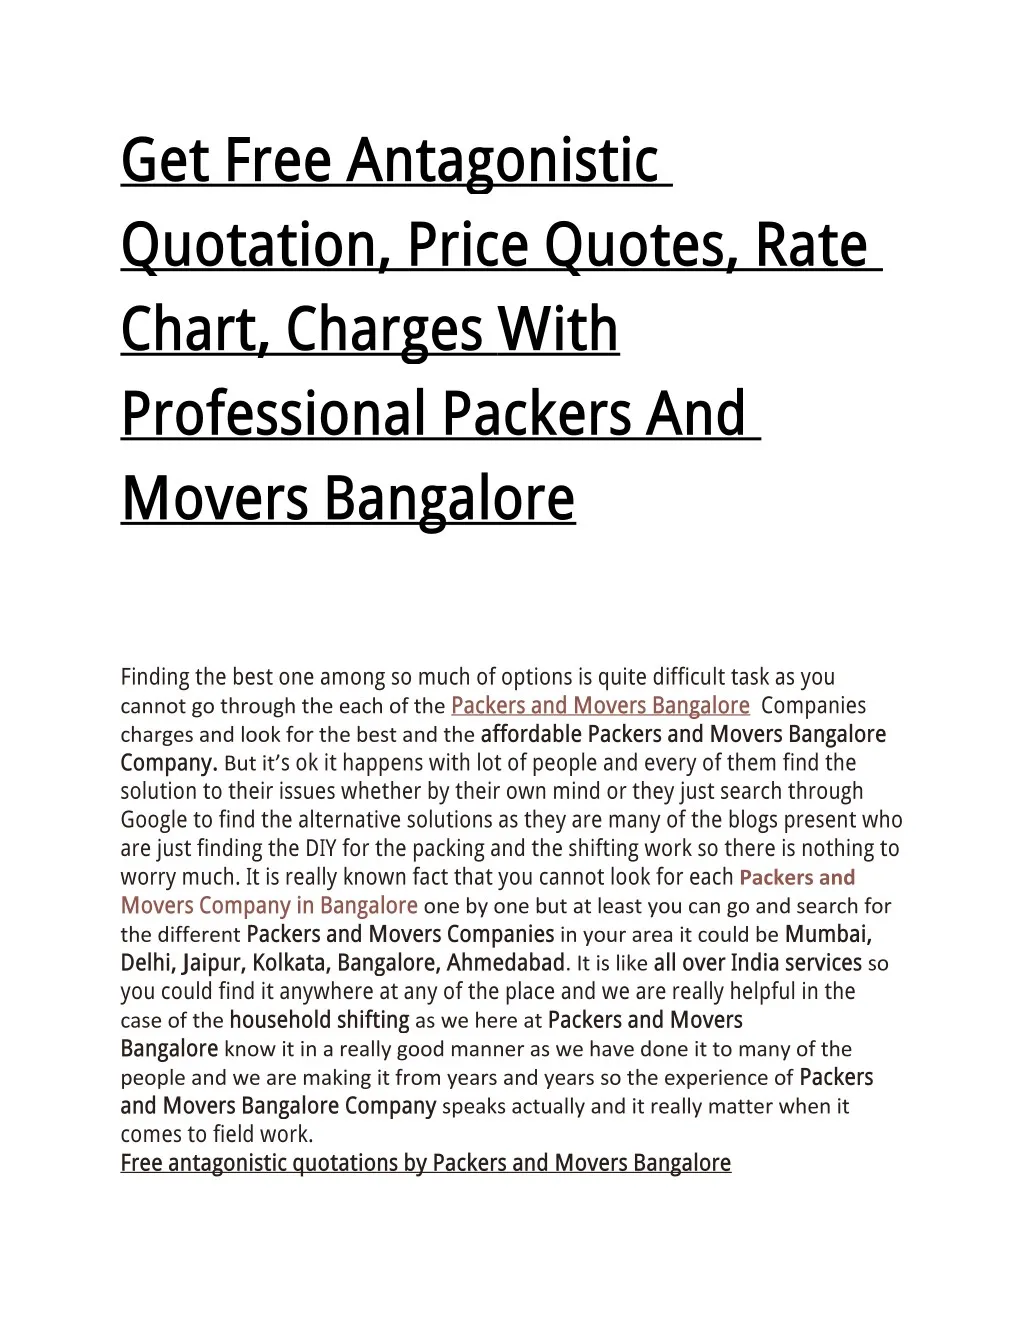 get free antagonistic quotation price quotes rate n.